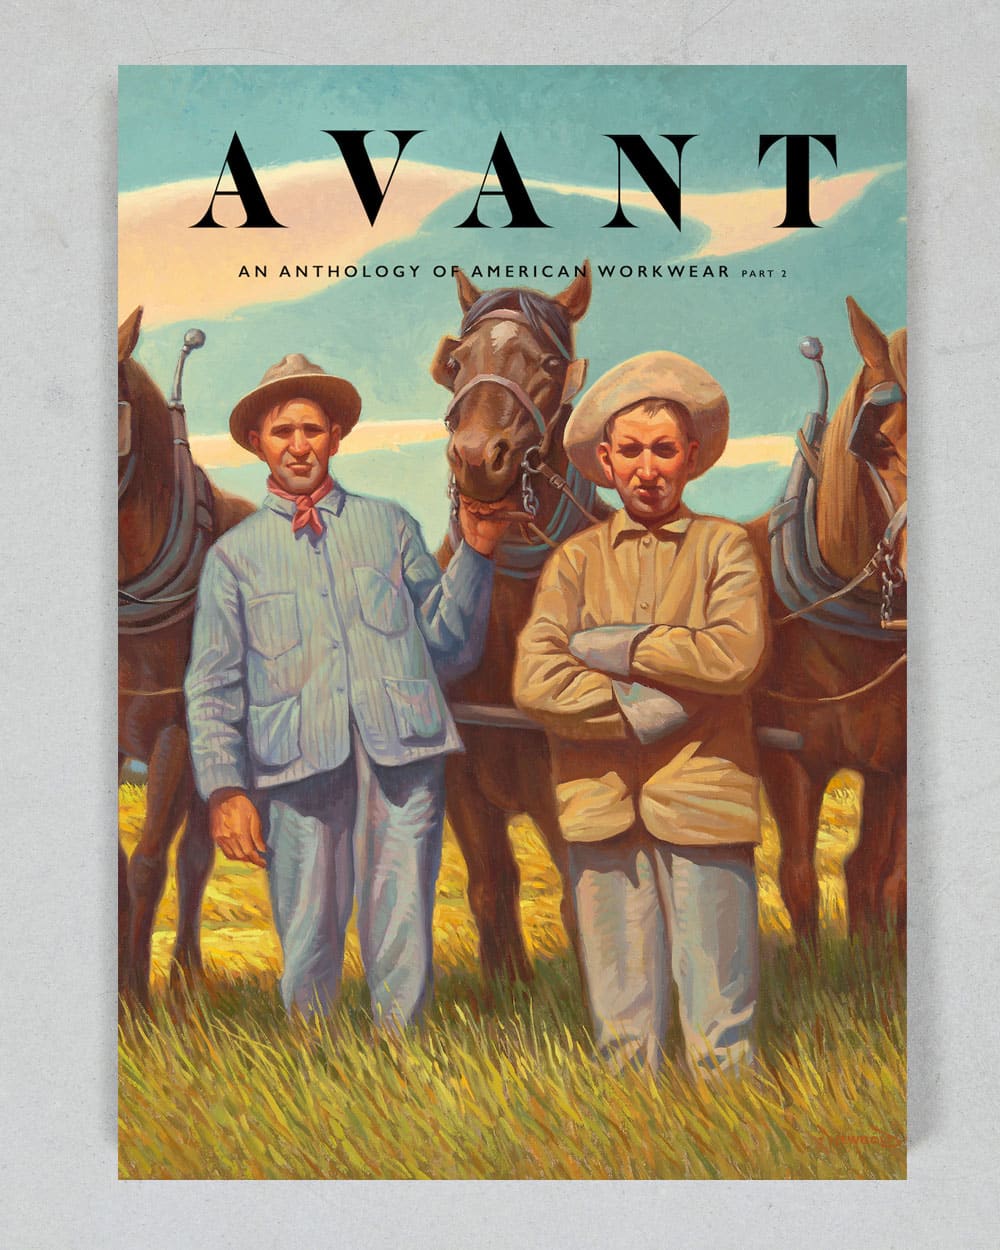 AVANT Magazine Issue 4: An Anthology of American Workwear Part 2